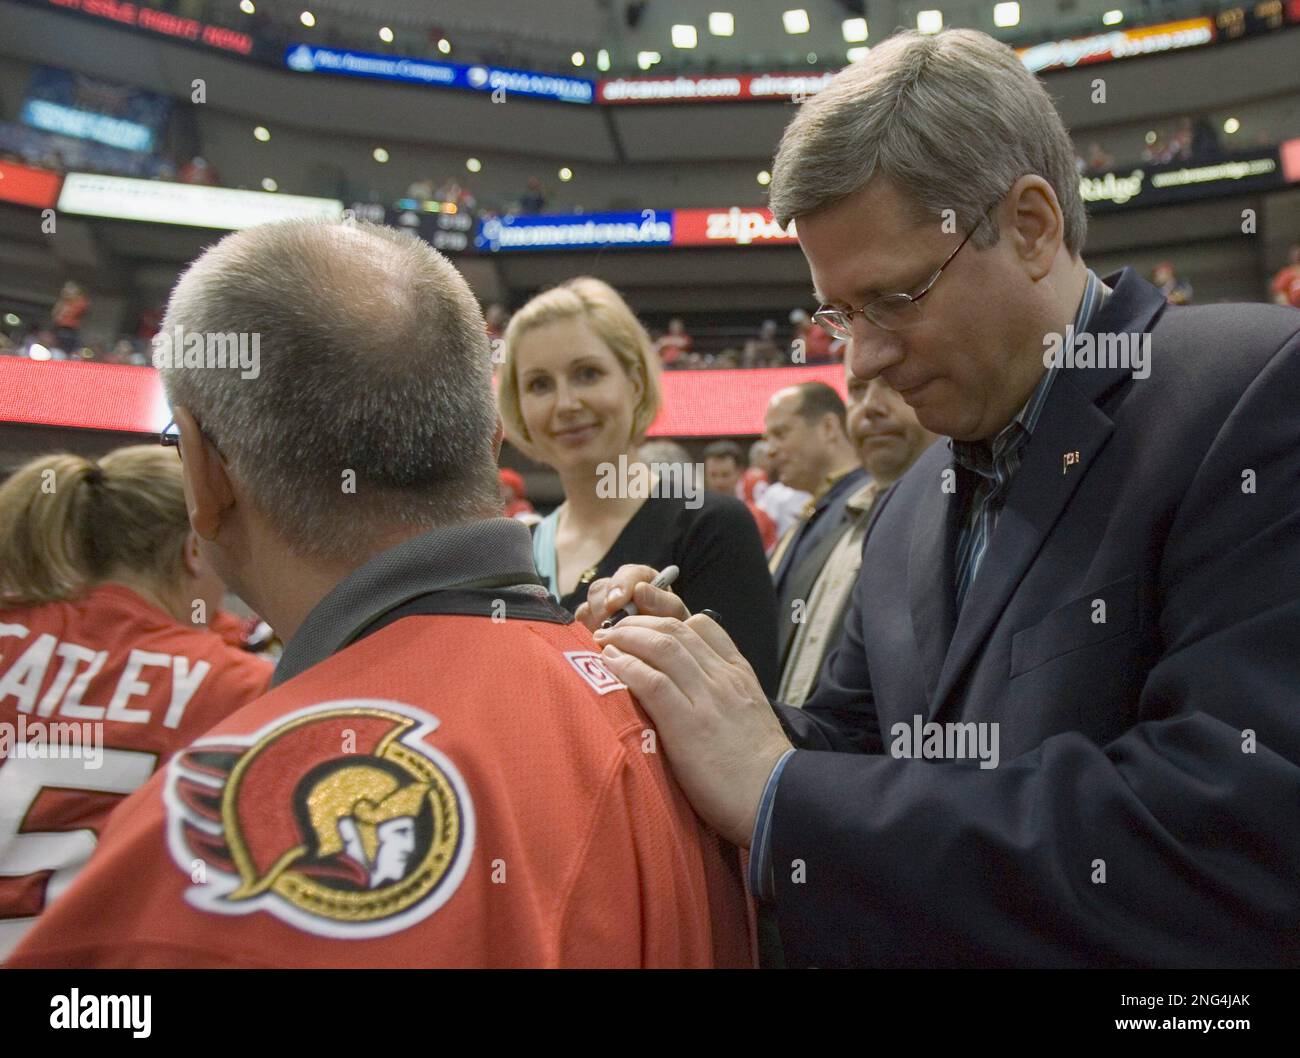 https://c8.alamy.com/comp/2NG4JAK/canadian-prime-minister-stephen-harper-autographs-a-fans-jersey-during-nhl-stanley-cup-game-3-action-between-the-ottawa-senators-and-anaheim-ducks-in-ottawa-on-saturday-june-2-2007-ap-phototom-hansoncp-2NG4JAK.jpg